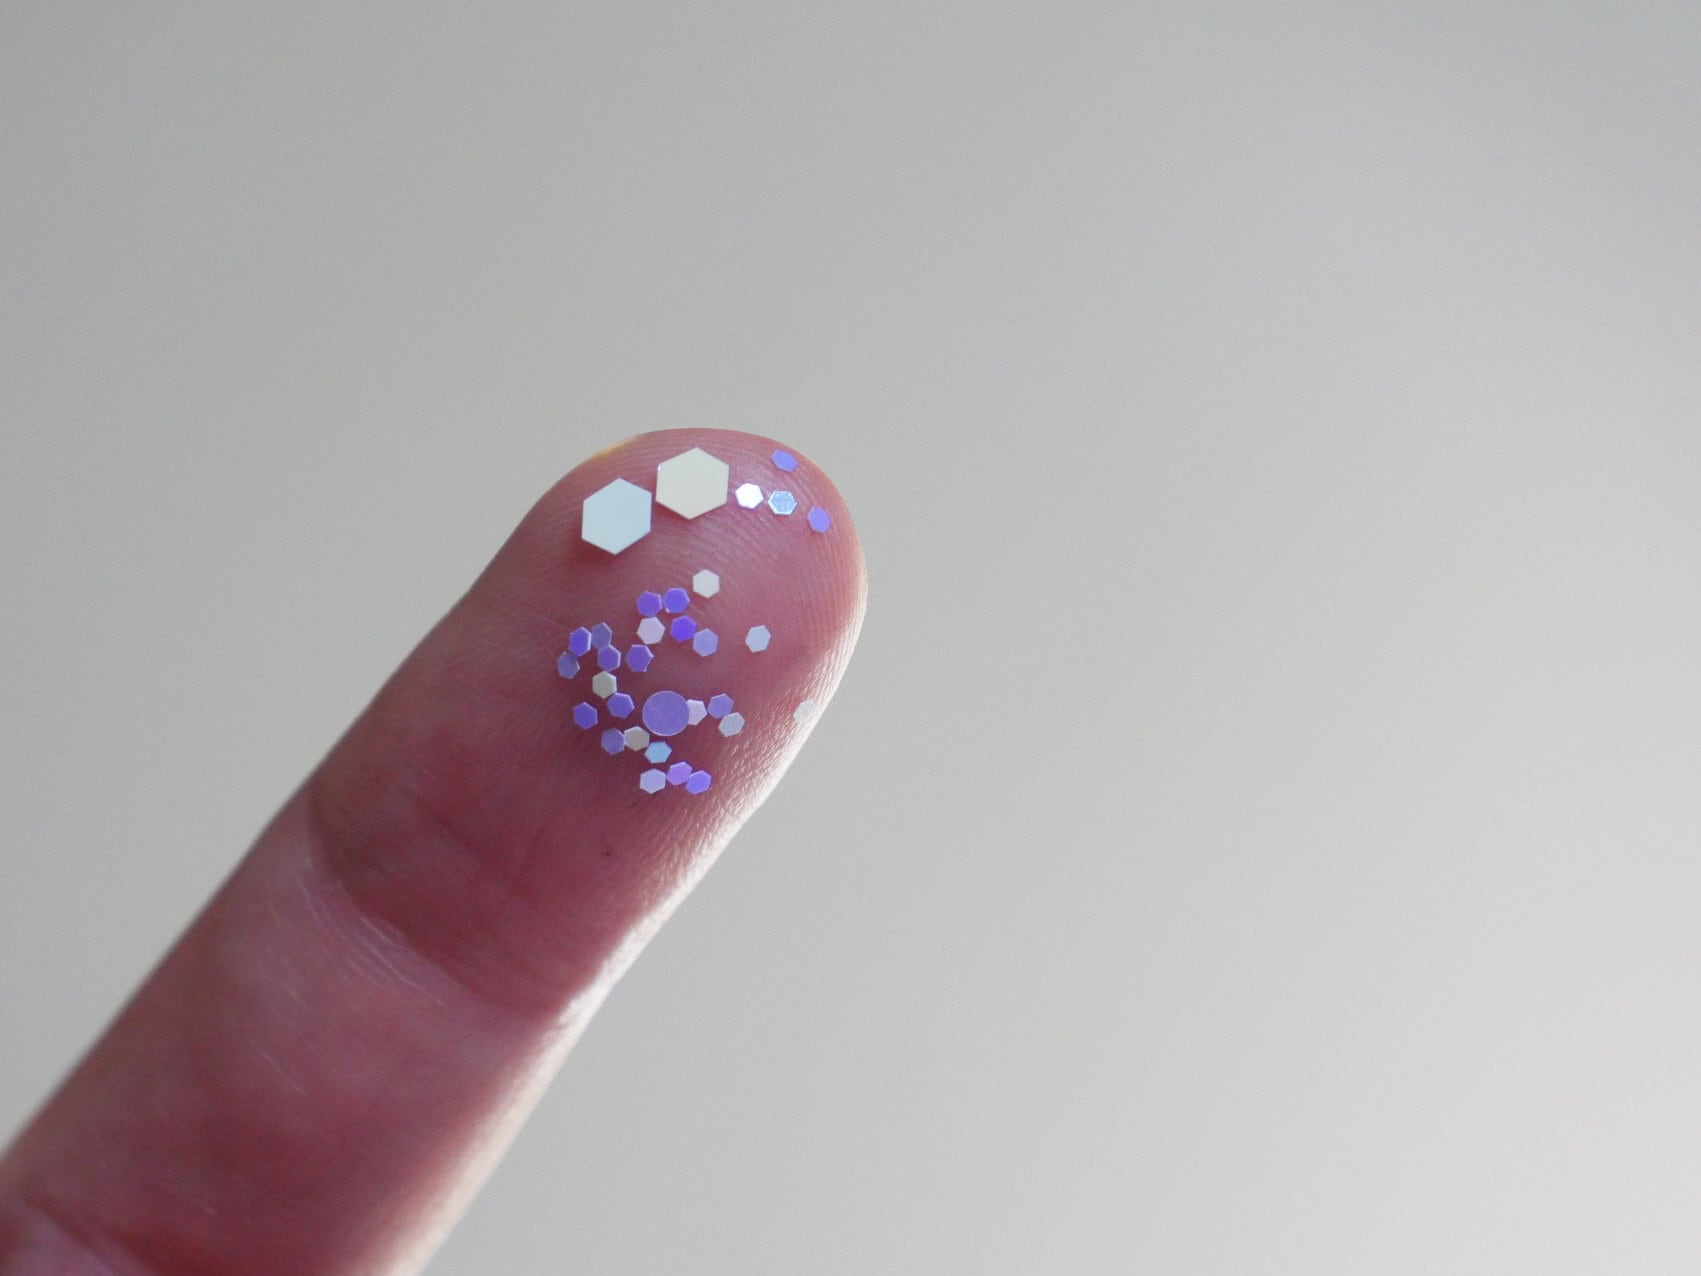 Hexagon&Dots Pearlescent Glitters/ Mixed Size Iridescent Sequins Nail Flakes /Mermaid Round Hexagon Chips Nail Decals